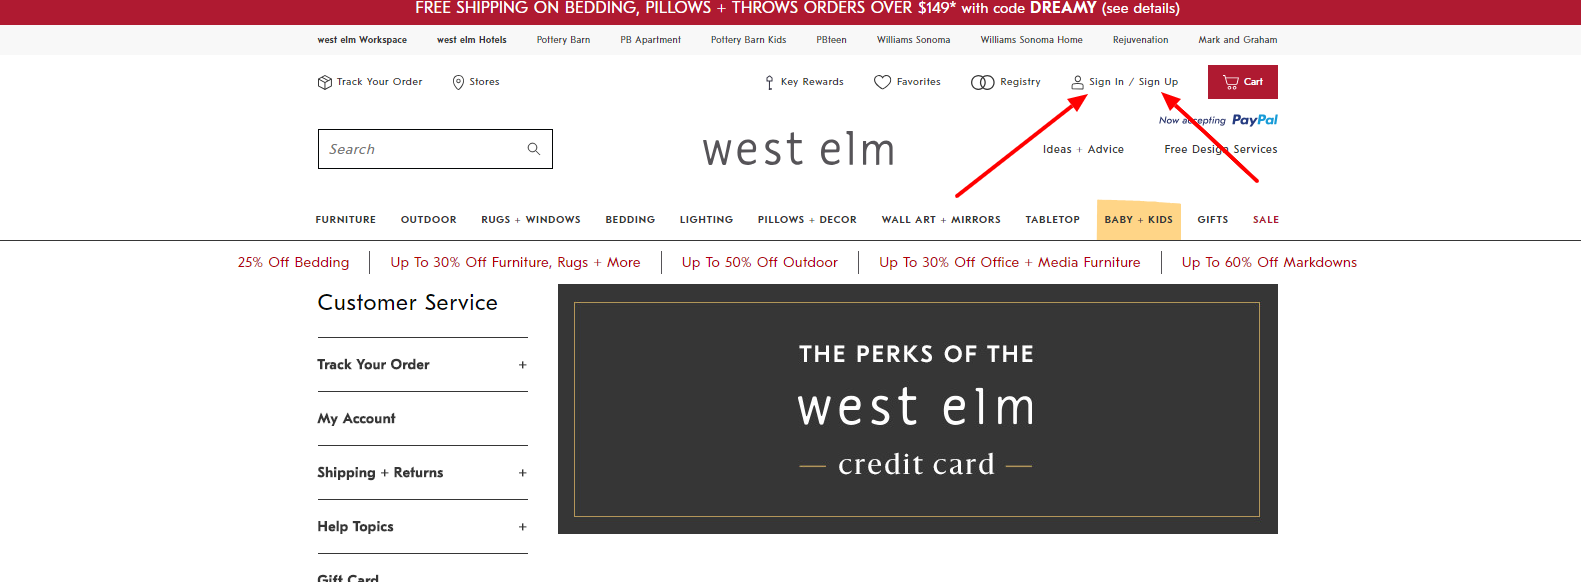 log in to your west elm credit card from wfnnb account